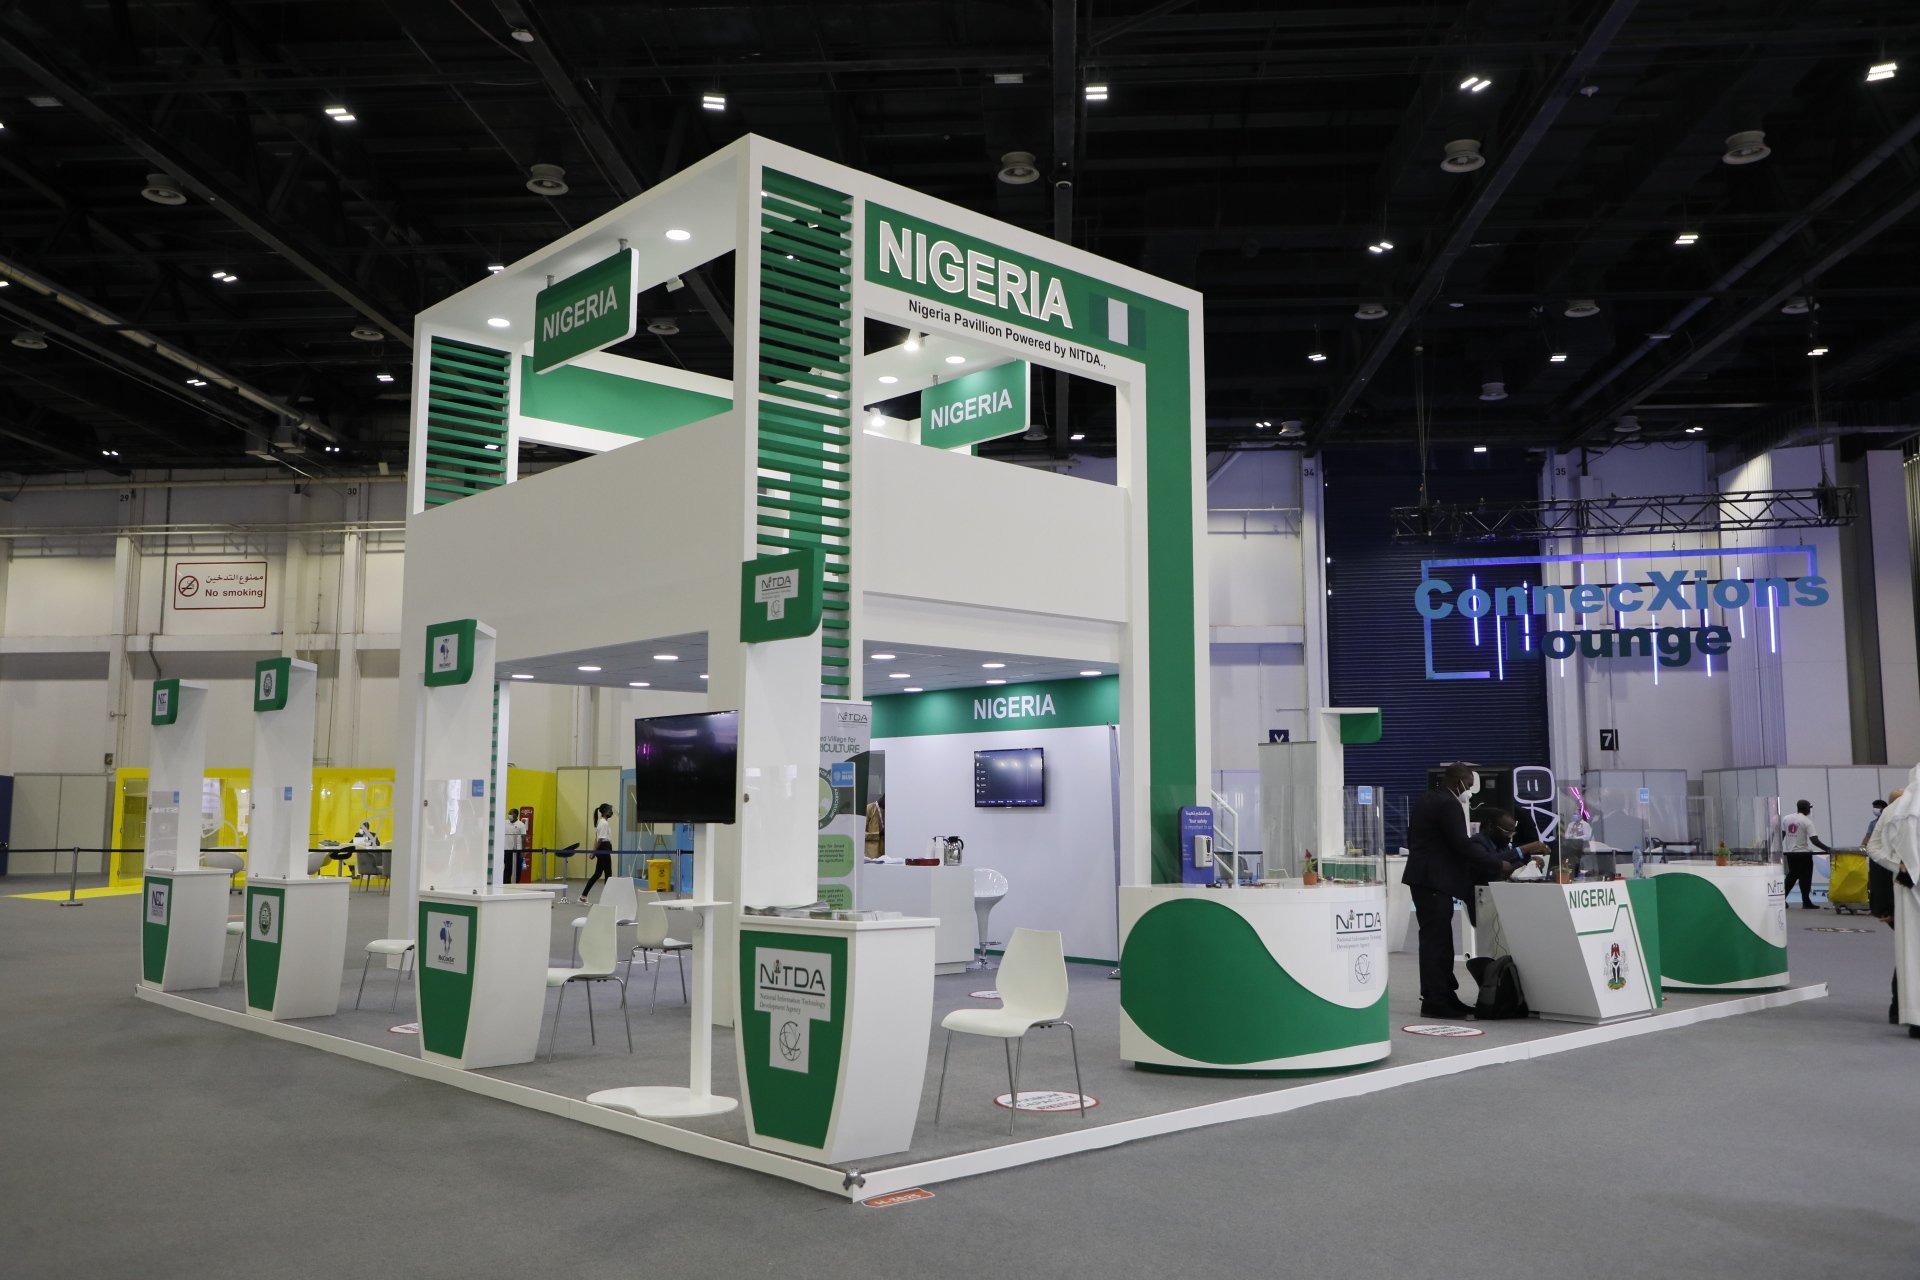 Expertise now contributes greater than oil to Nigeria’s GDP